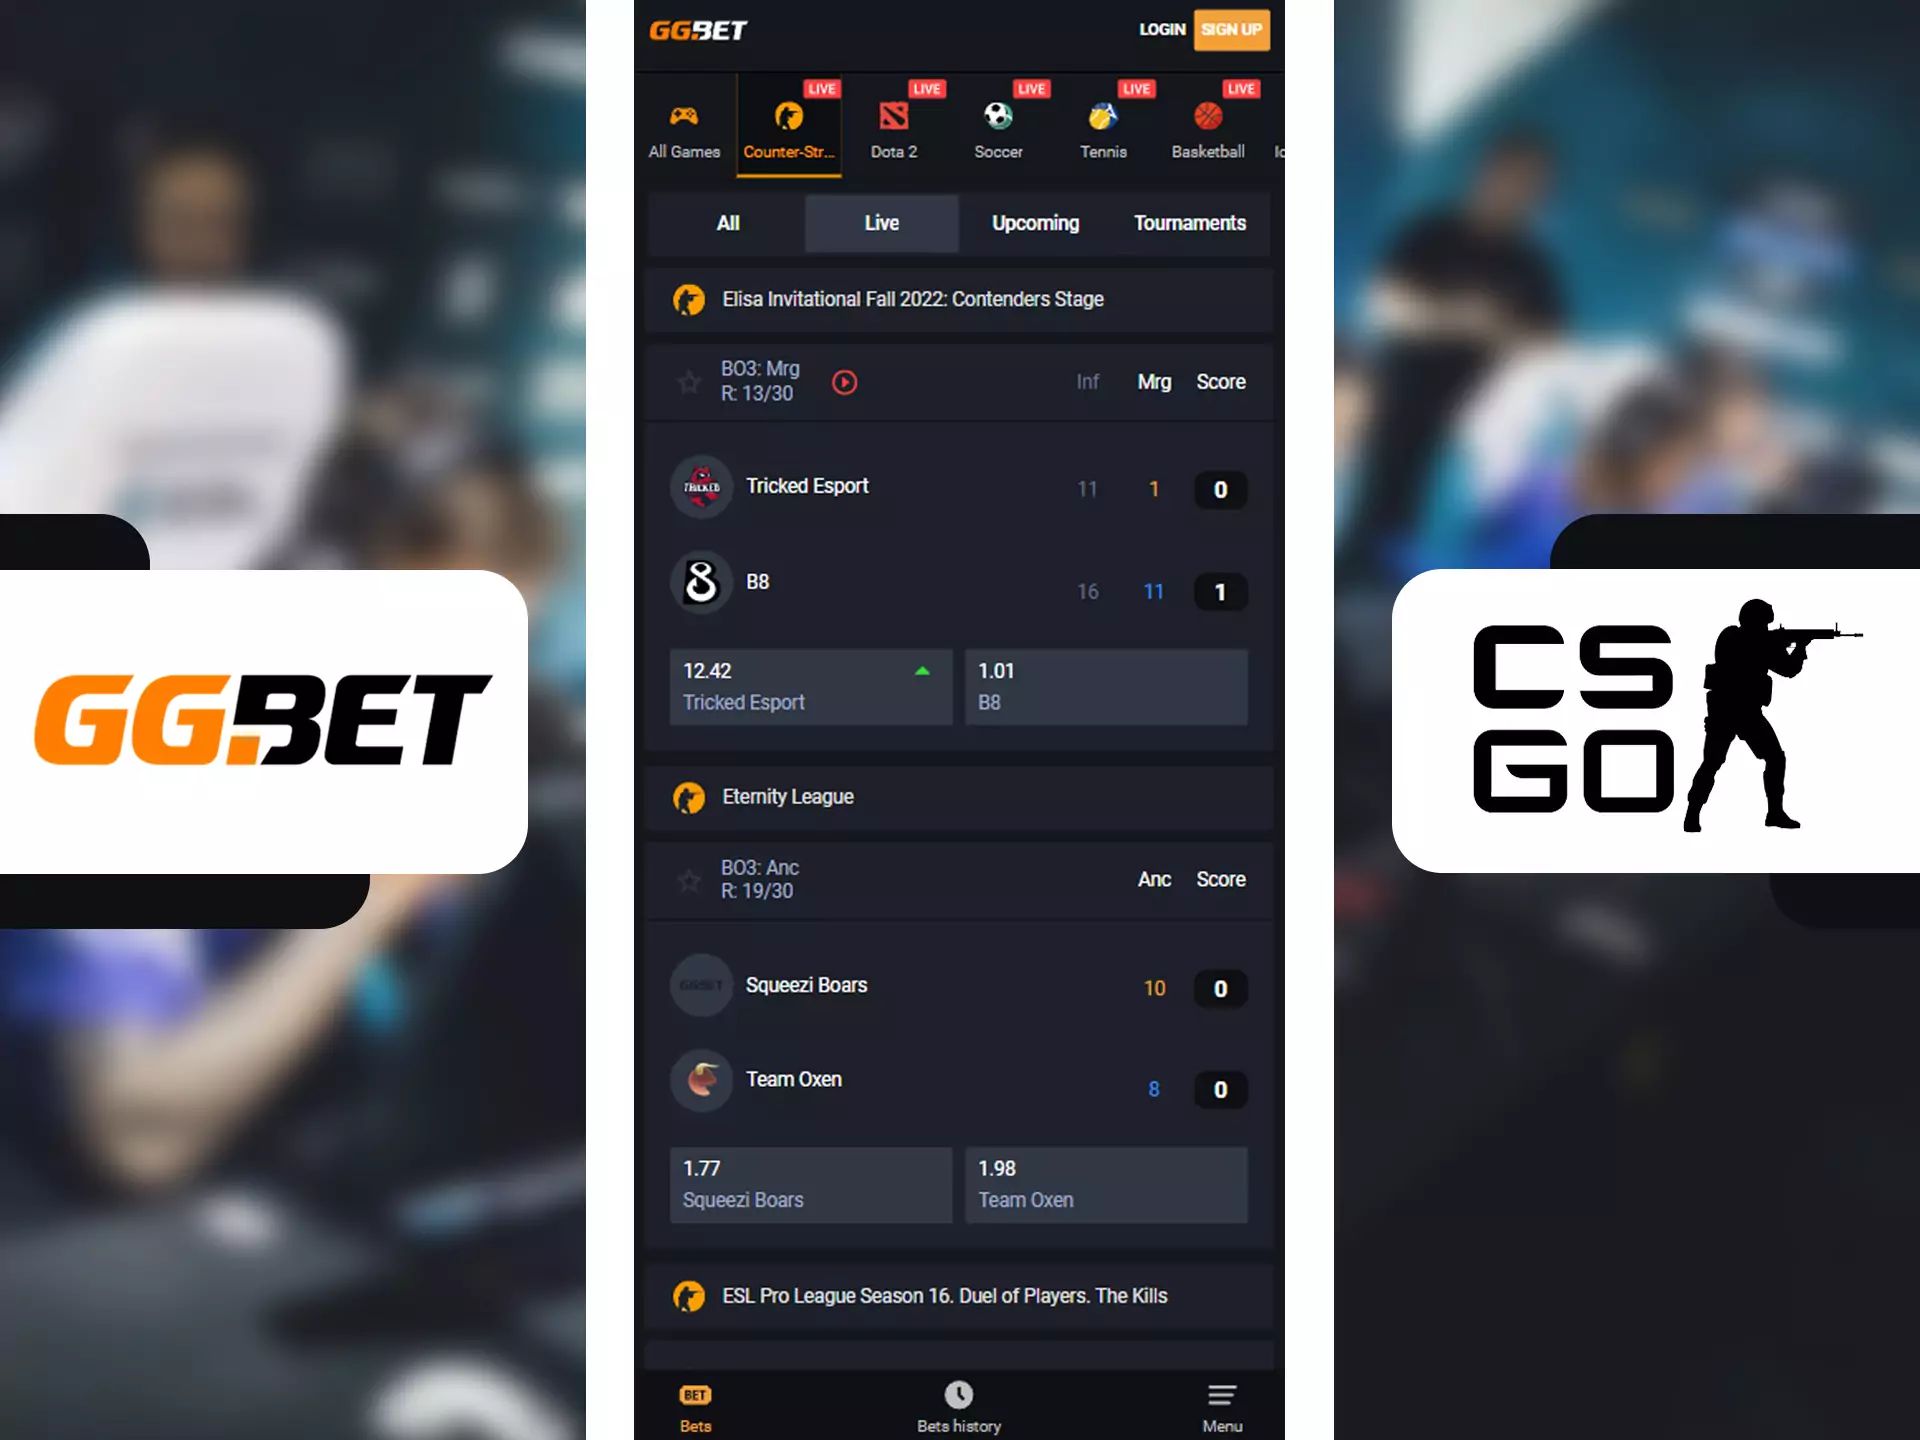 Bet on great young CS:GO teams with GGBet app.